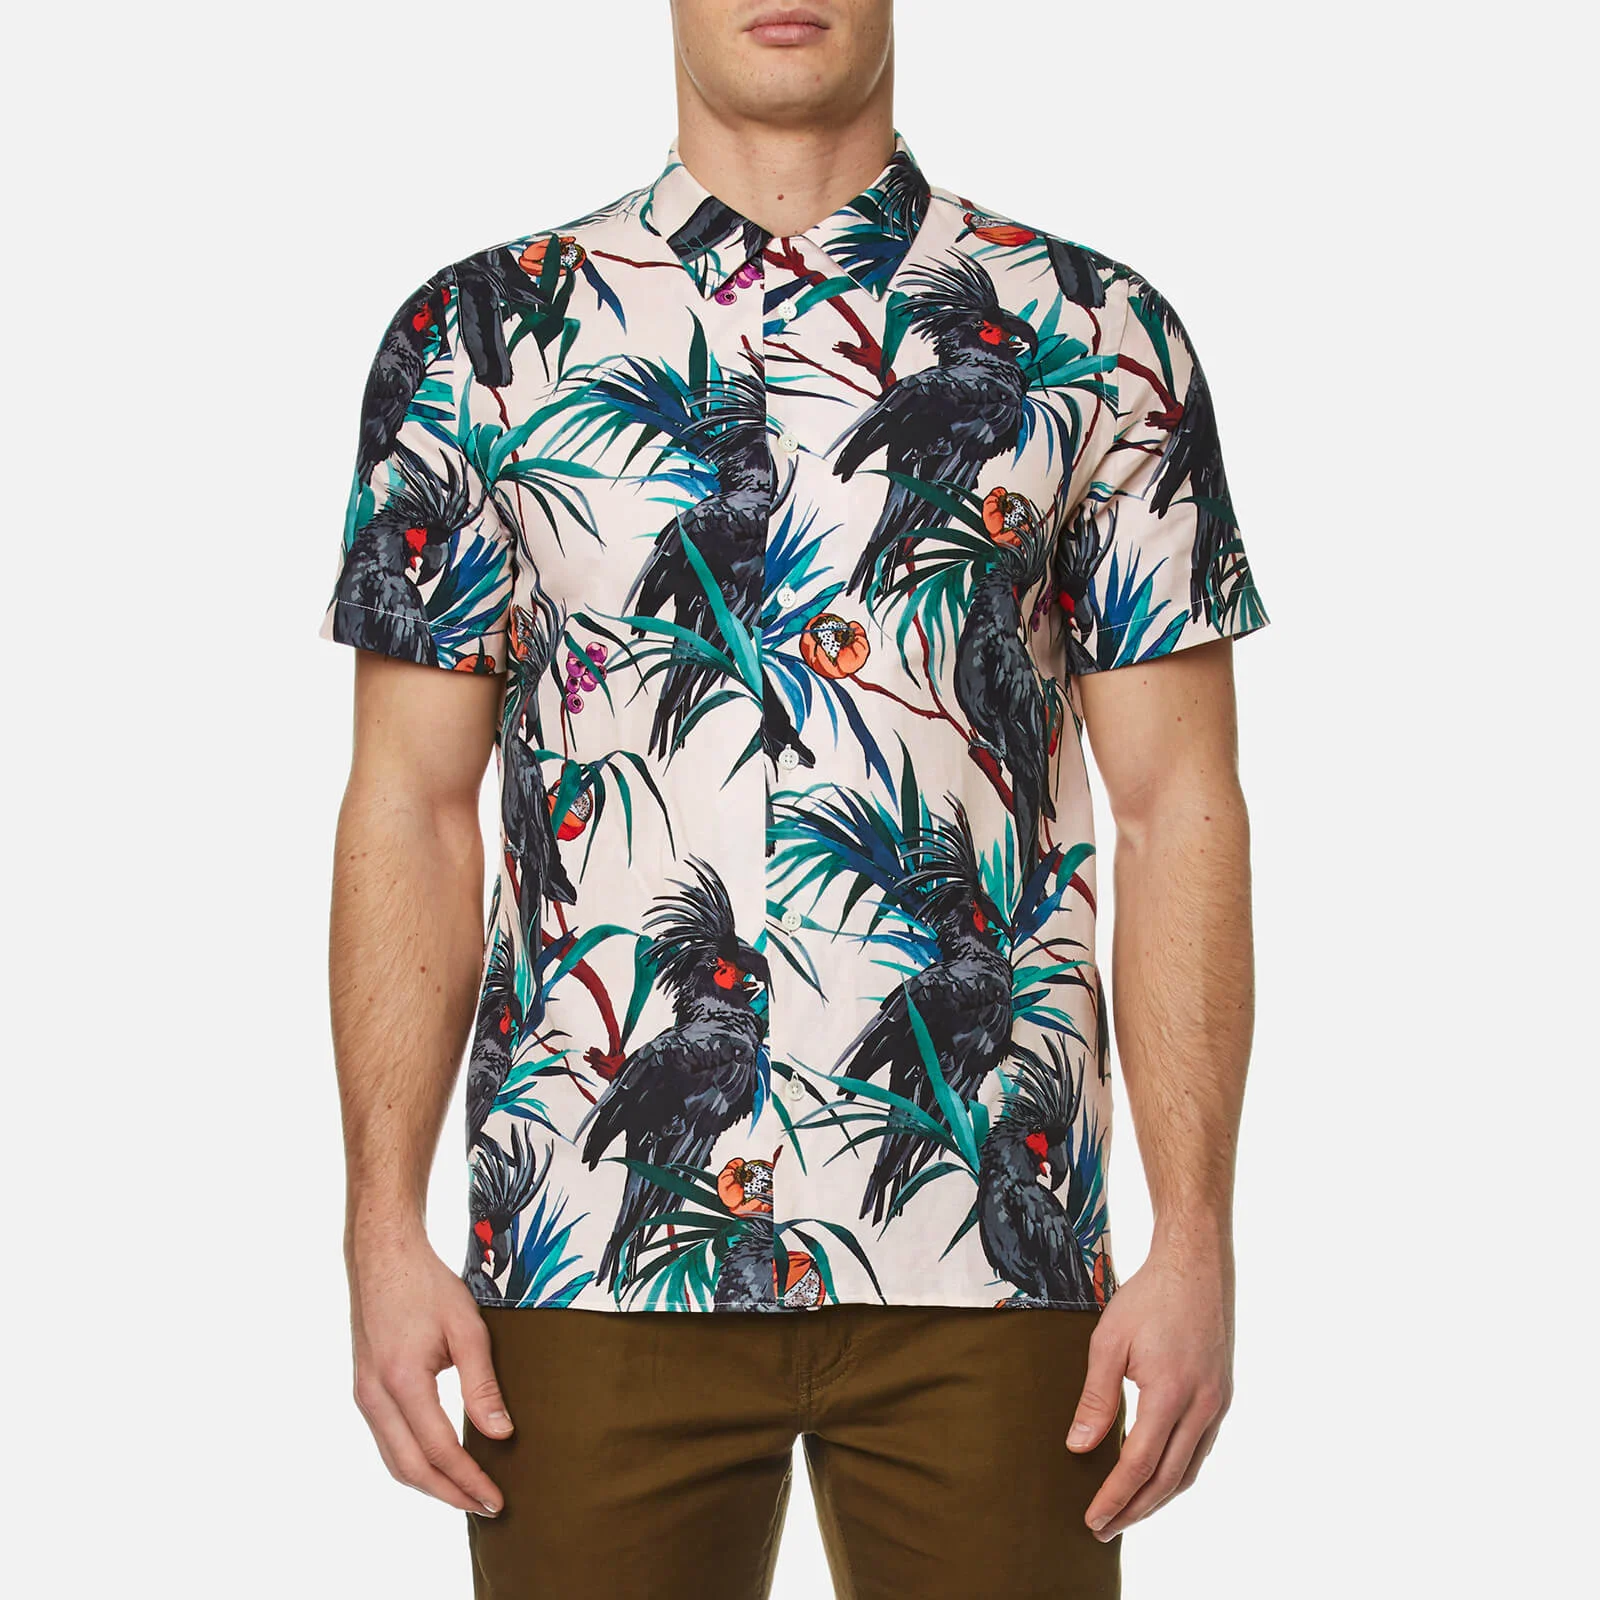 PS by Paul Smith Men's Short Sleeve Printed Shirt - Multi Image 1